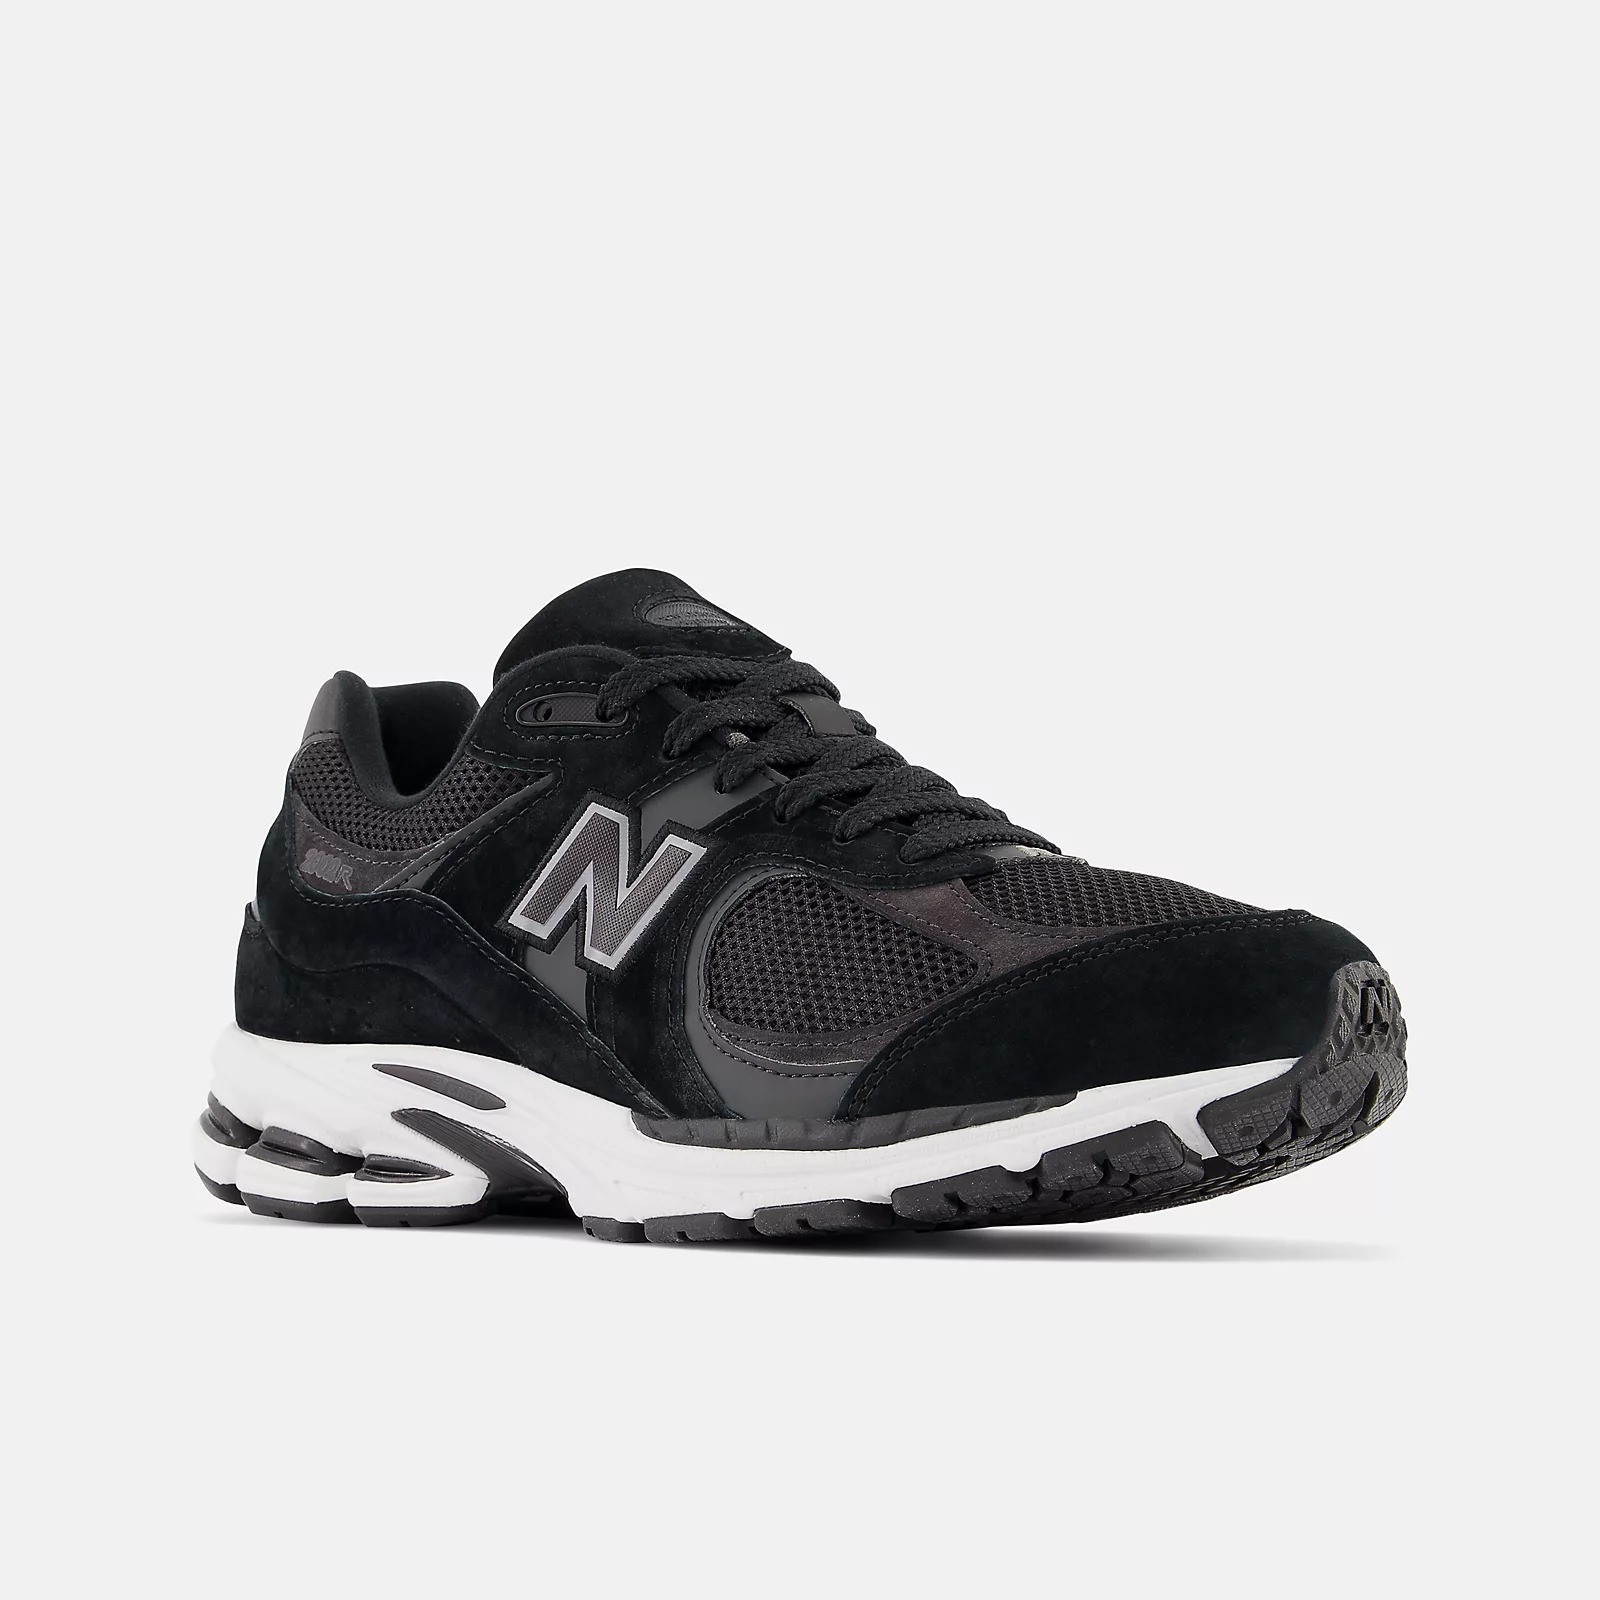 Chaussures New Balance 2002 pour homme - Black/White - M2002RBK